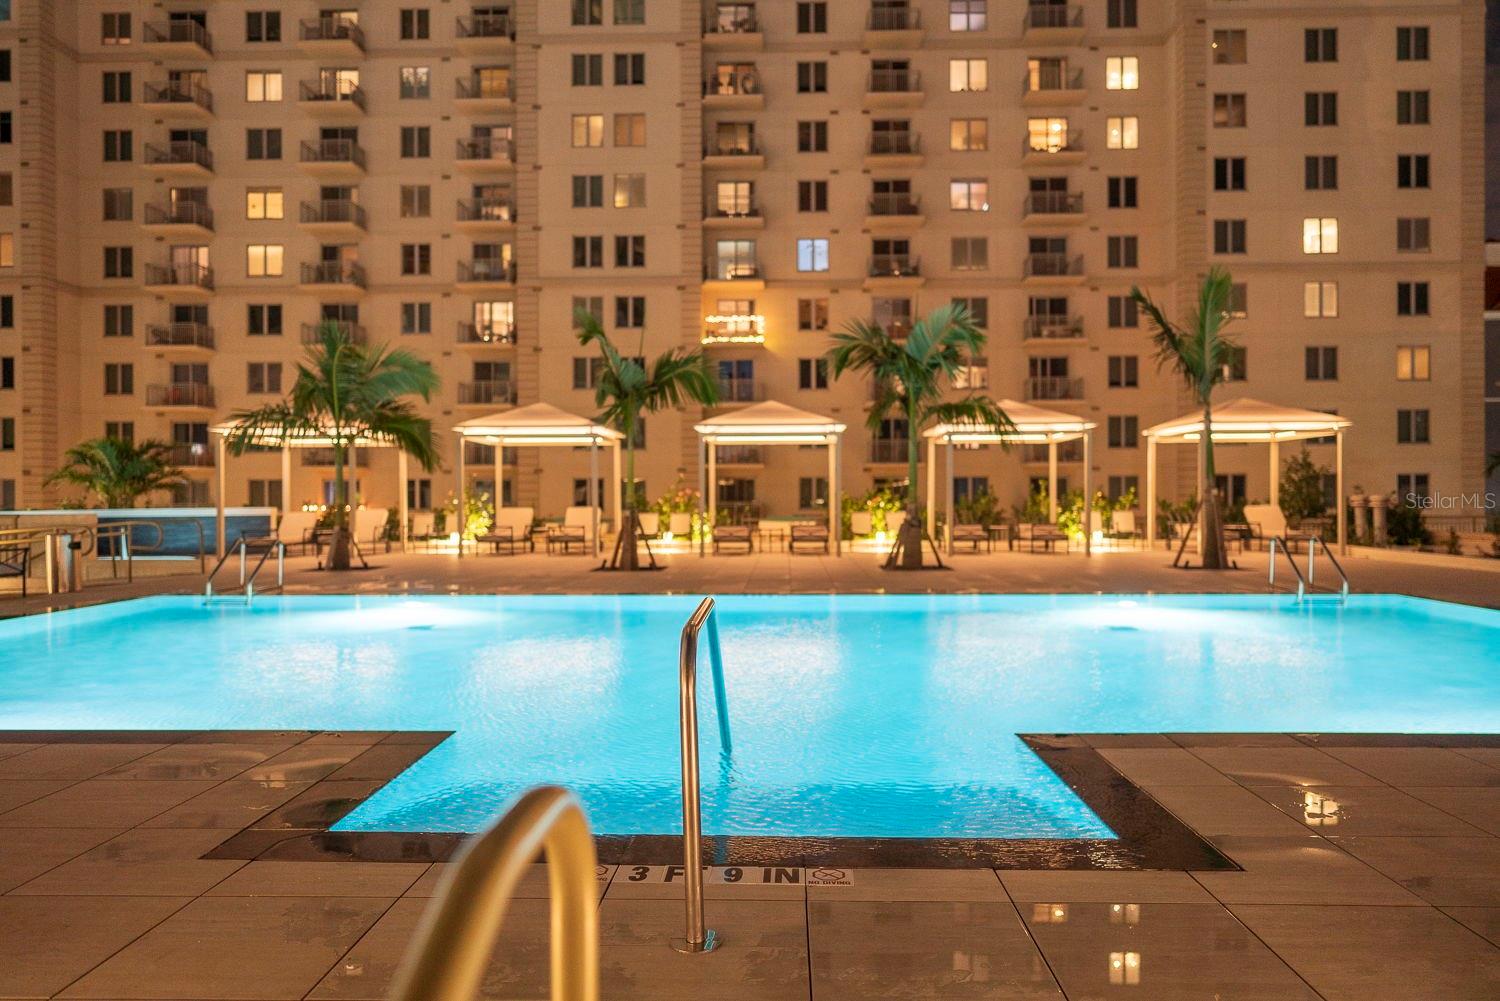 Relax and enjoy the heated pool with stunning city views.